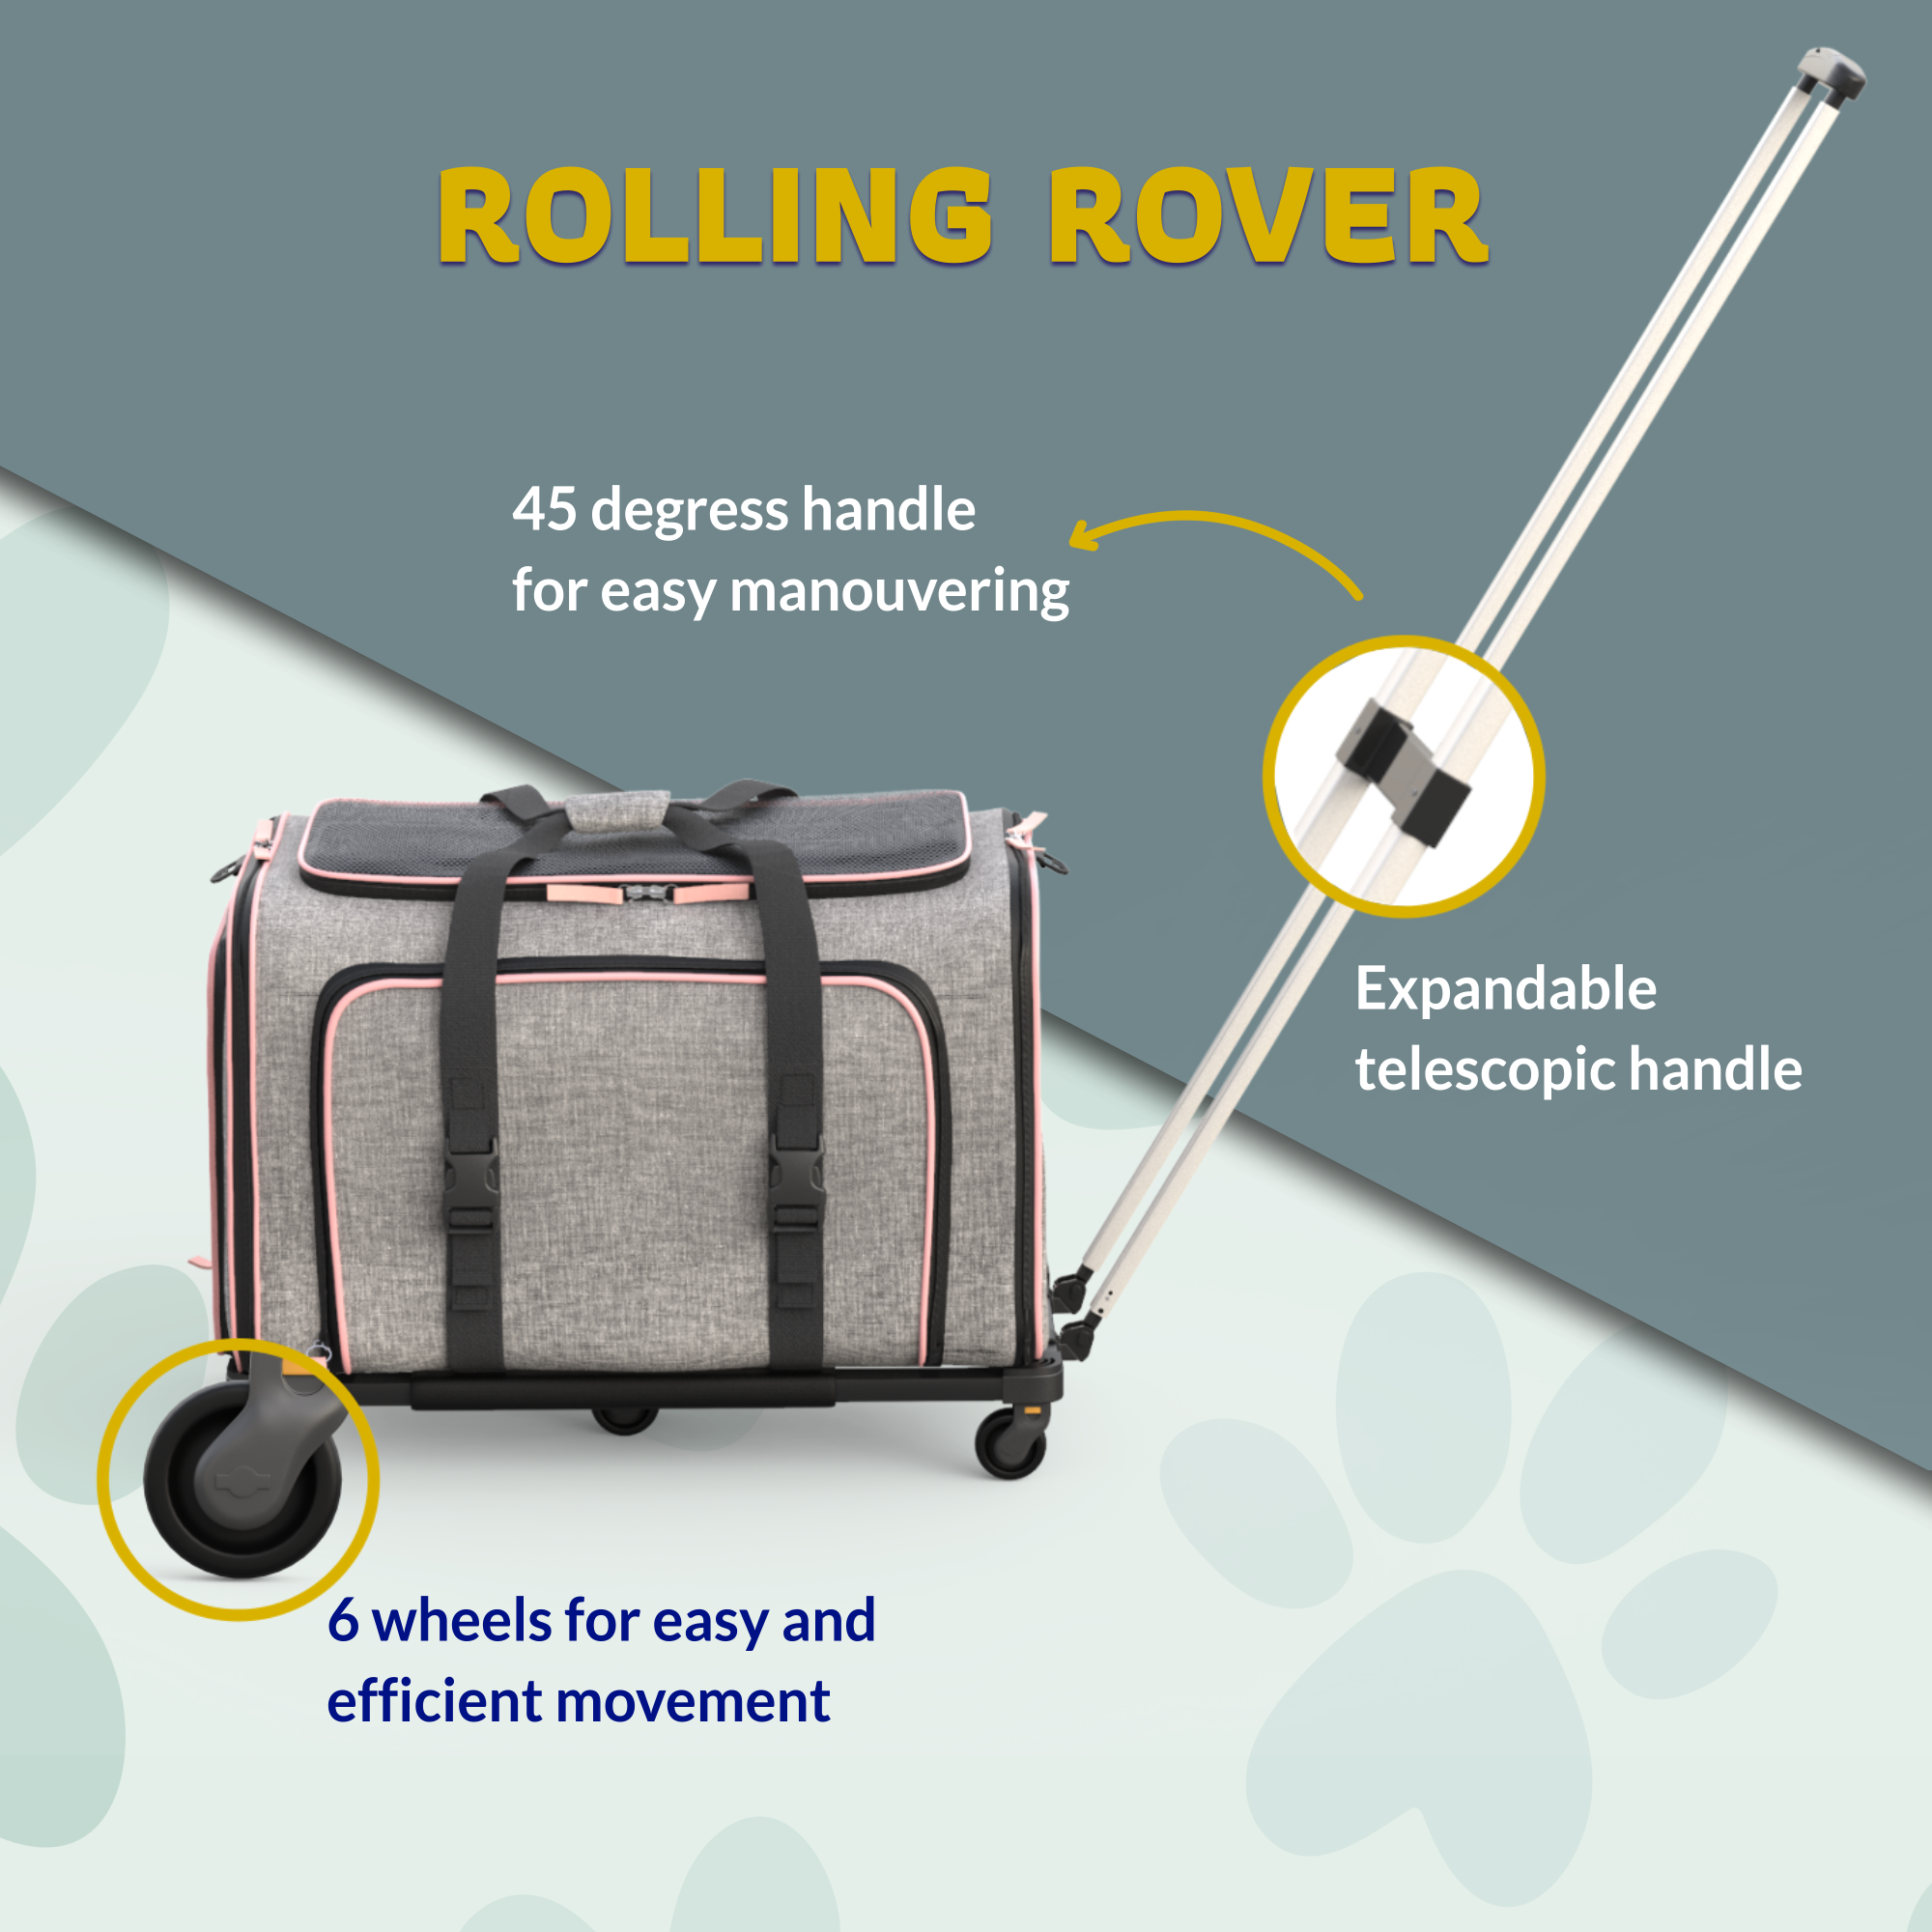 Katziela Rolling Rover Airline Compliant Expandable Wheeled Pet Carrier